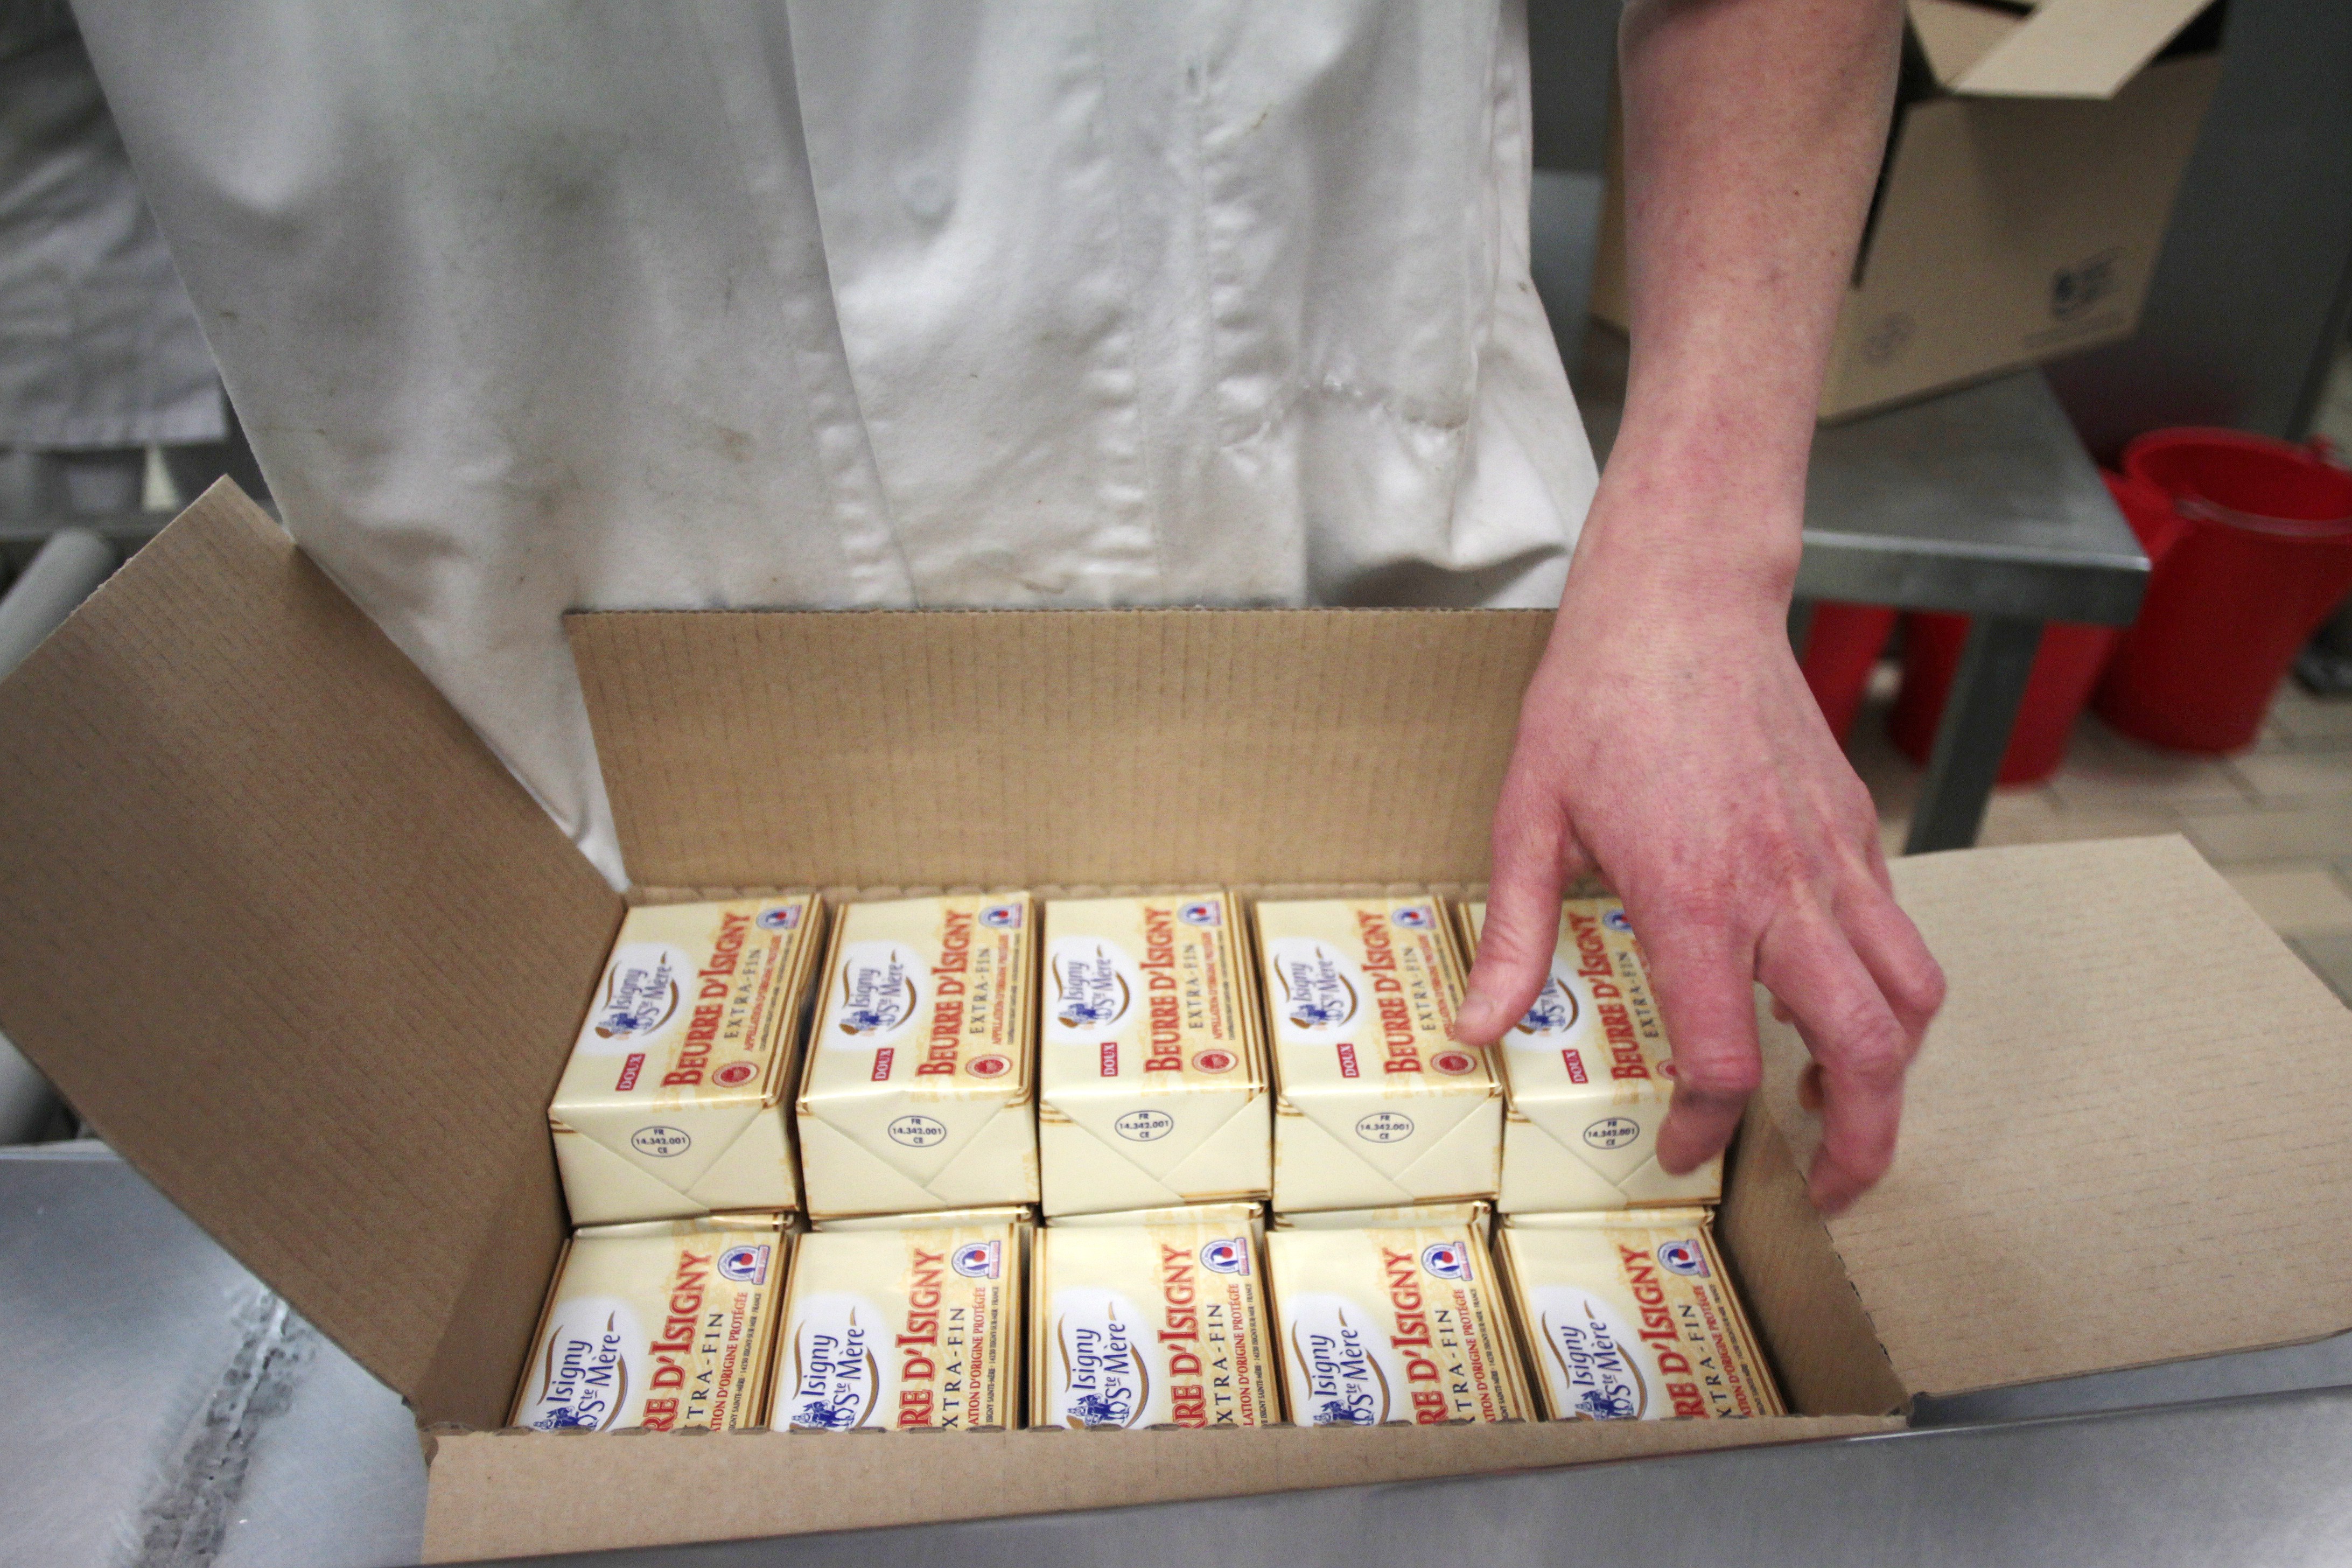 A worker packs butter at the production site of the Isigny-Sainte-Mere dairy co-operative in Isigny-sur-Mer, northwestern France, on April 4, 2014. (CHARLY TRIBALLEAU—AFP/Getty Images)